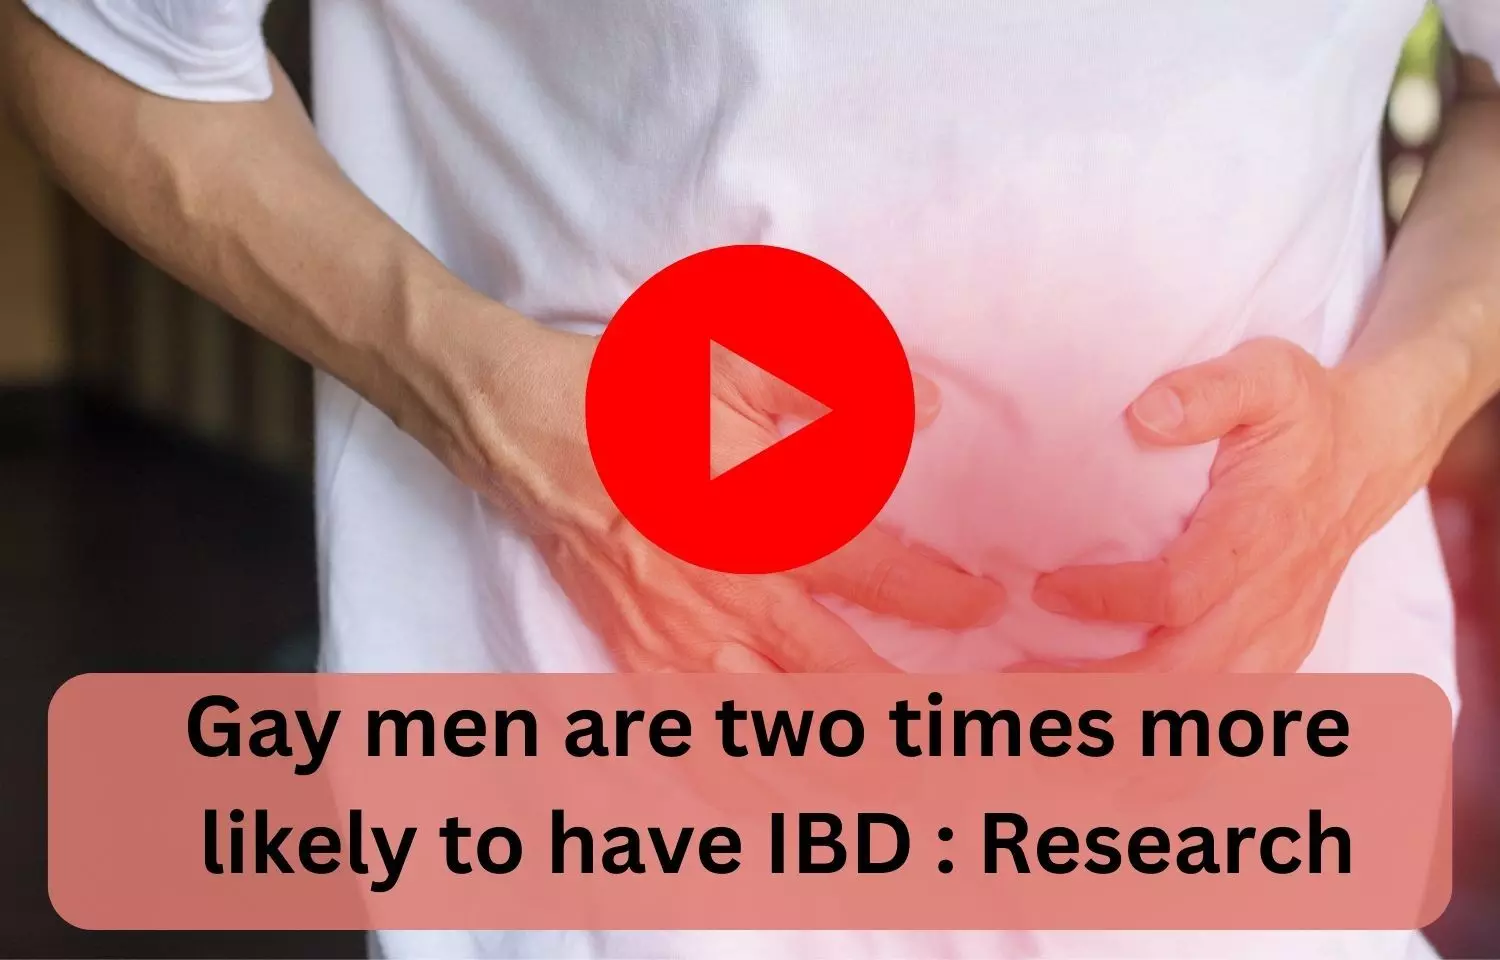 Gay men are two times more likely to have inflammatory bowel disease, according to new research